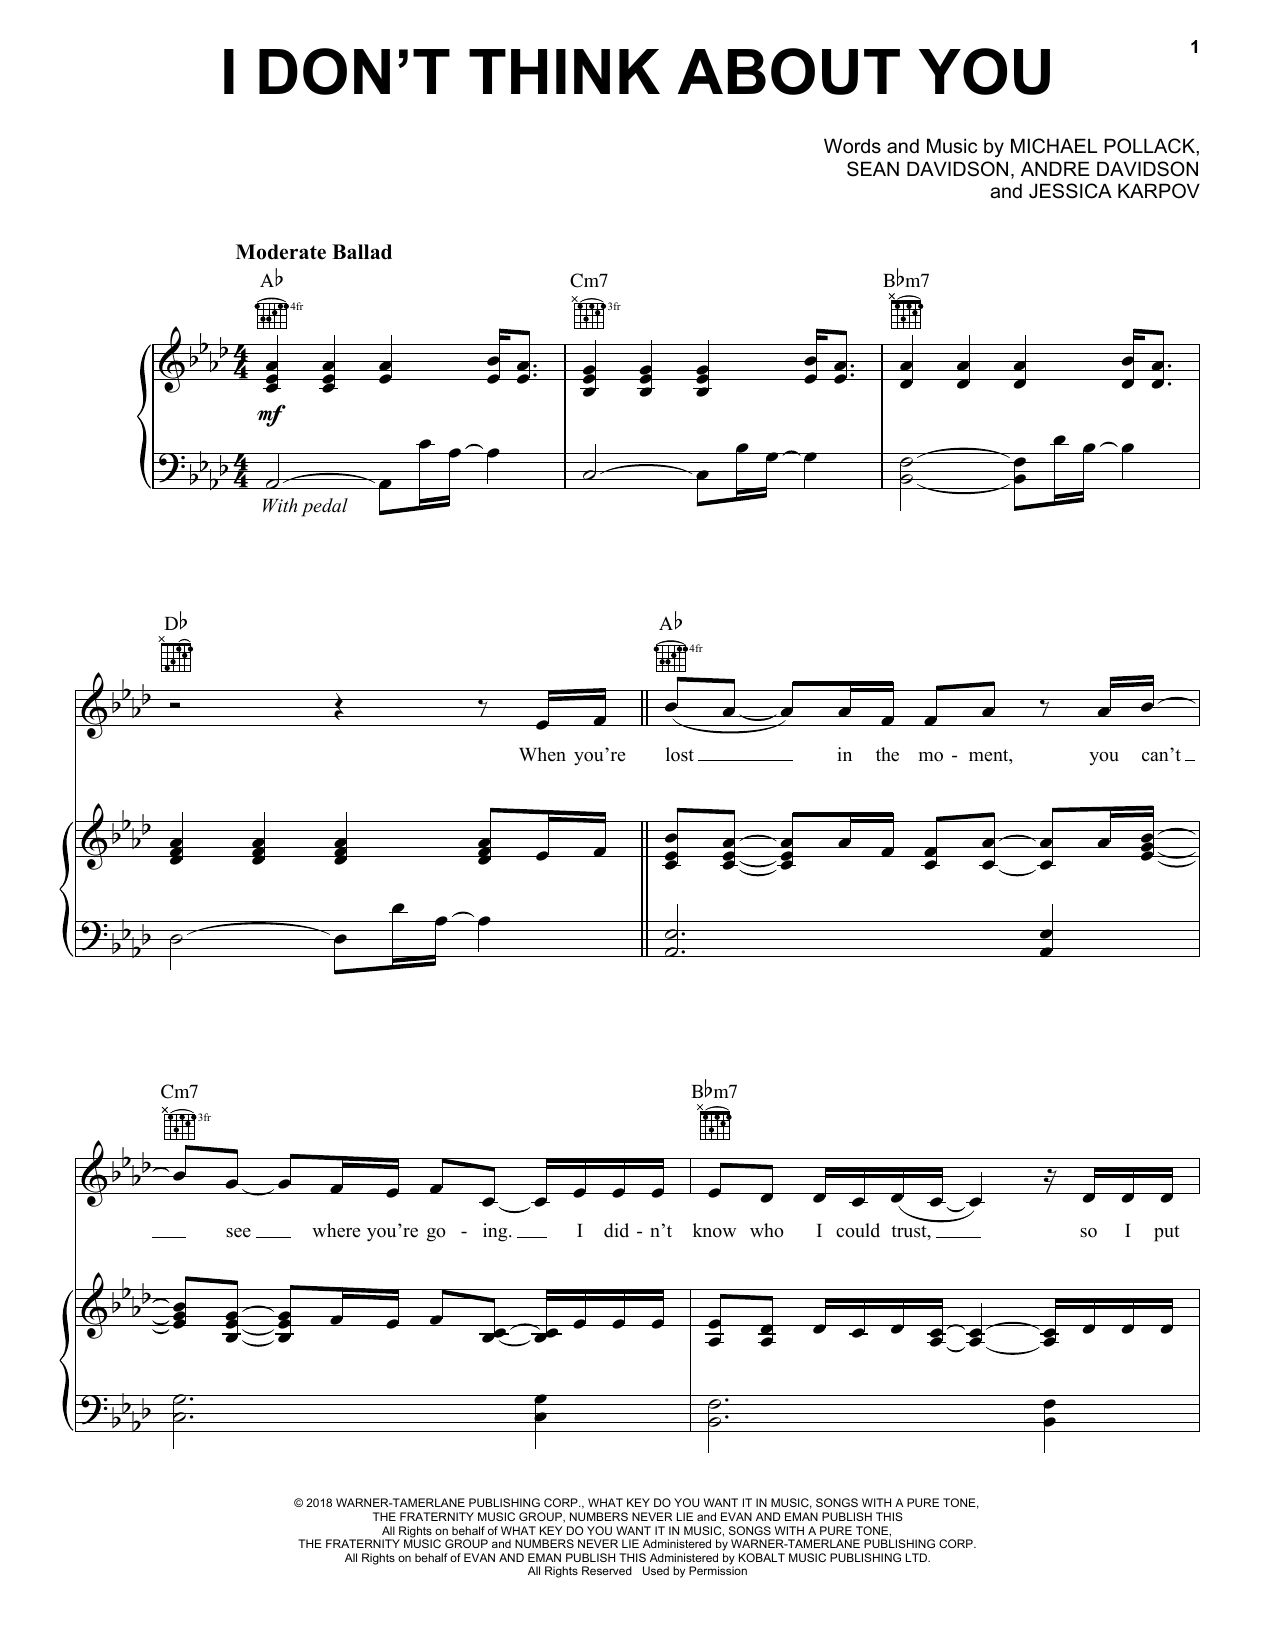 Download Kelly Clarkson I Don't Think About You Sheet Music